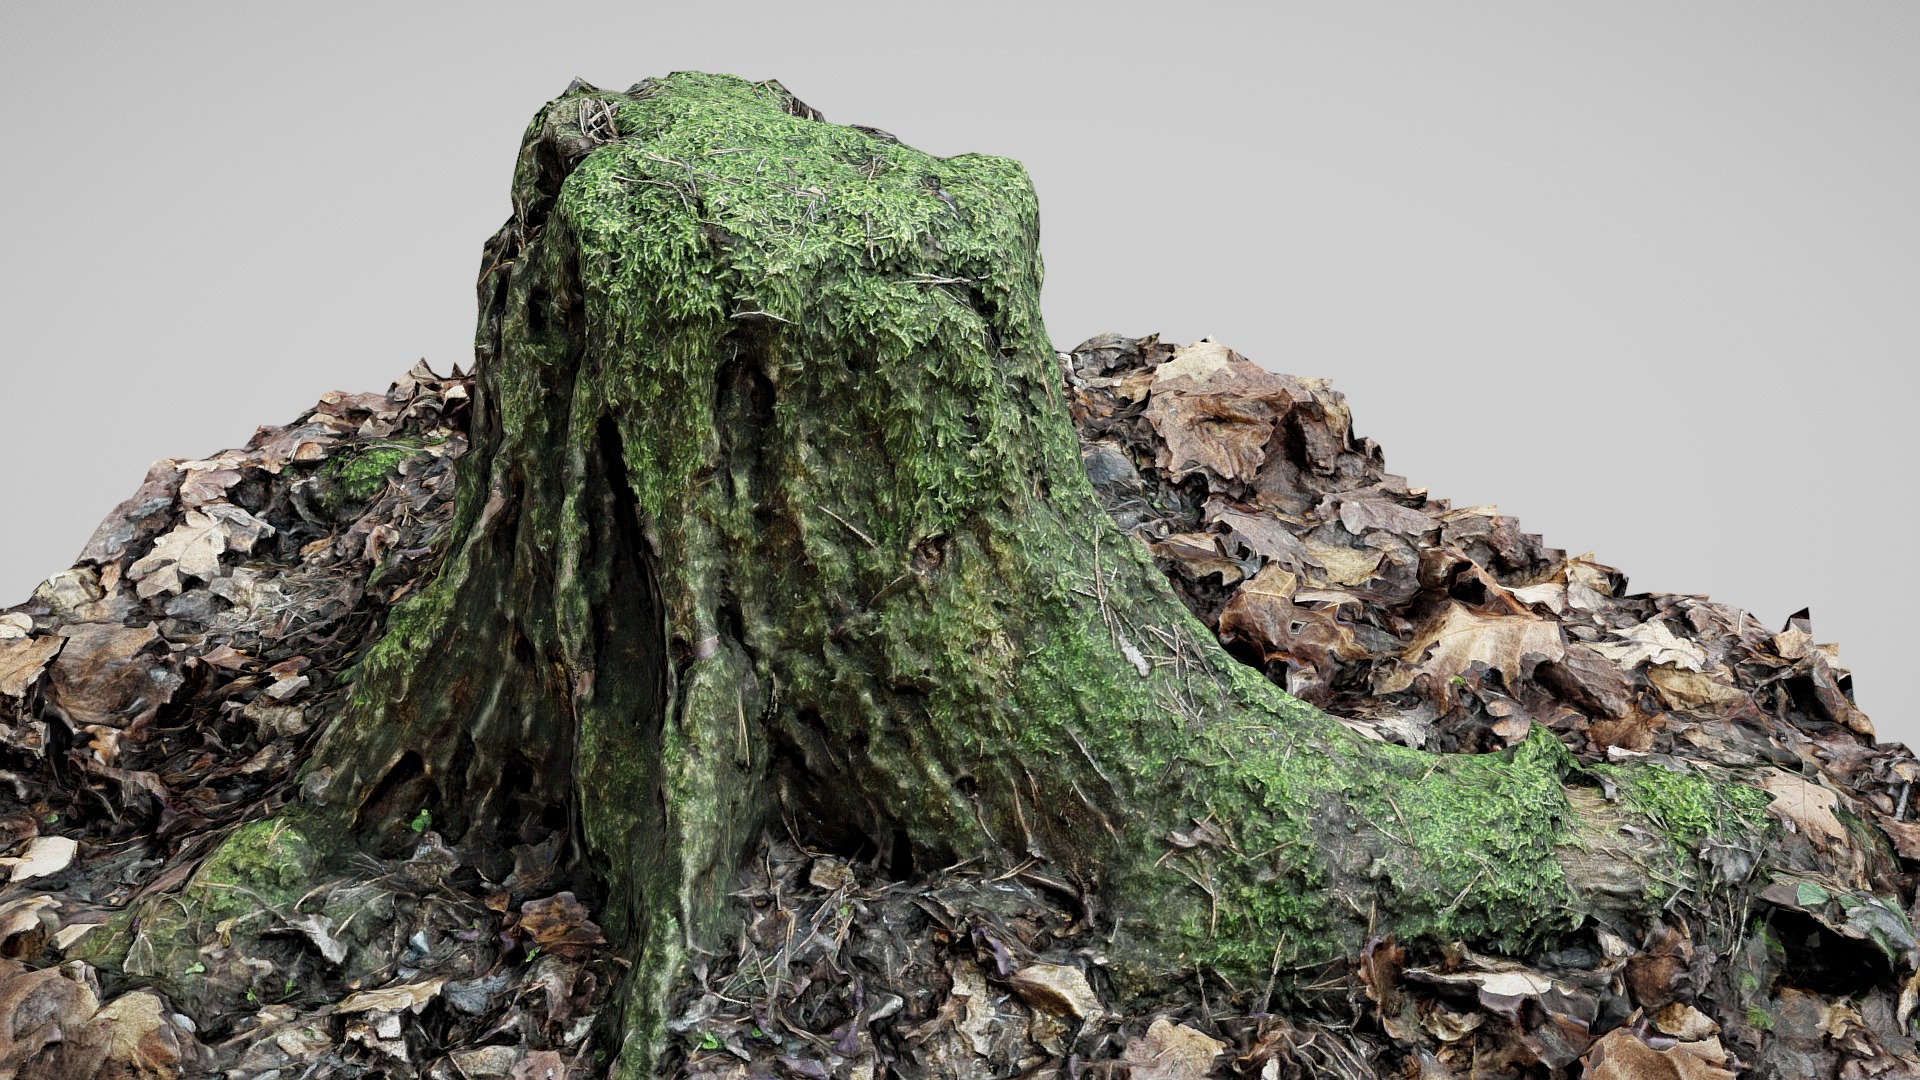 3D model Mossy Tree Stump - This is a 3D model of the Mossy Tree Stump. The 3D model is about a large rock with moss growing on it.